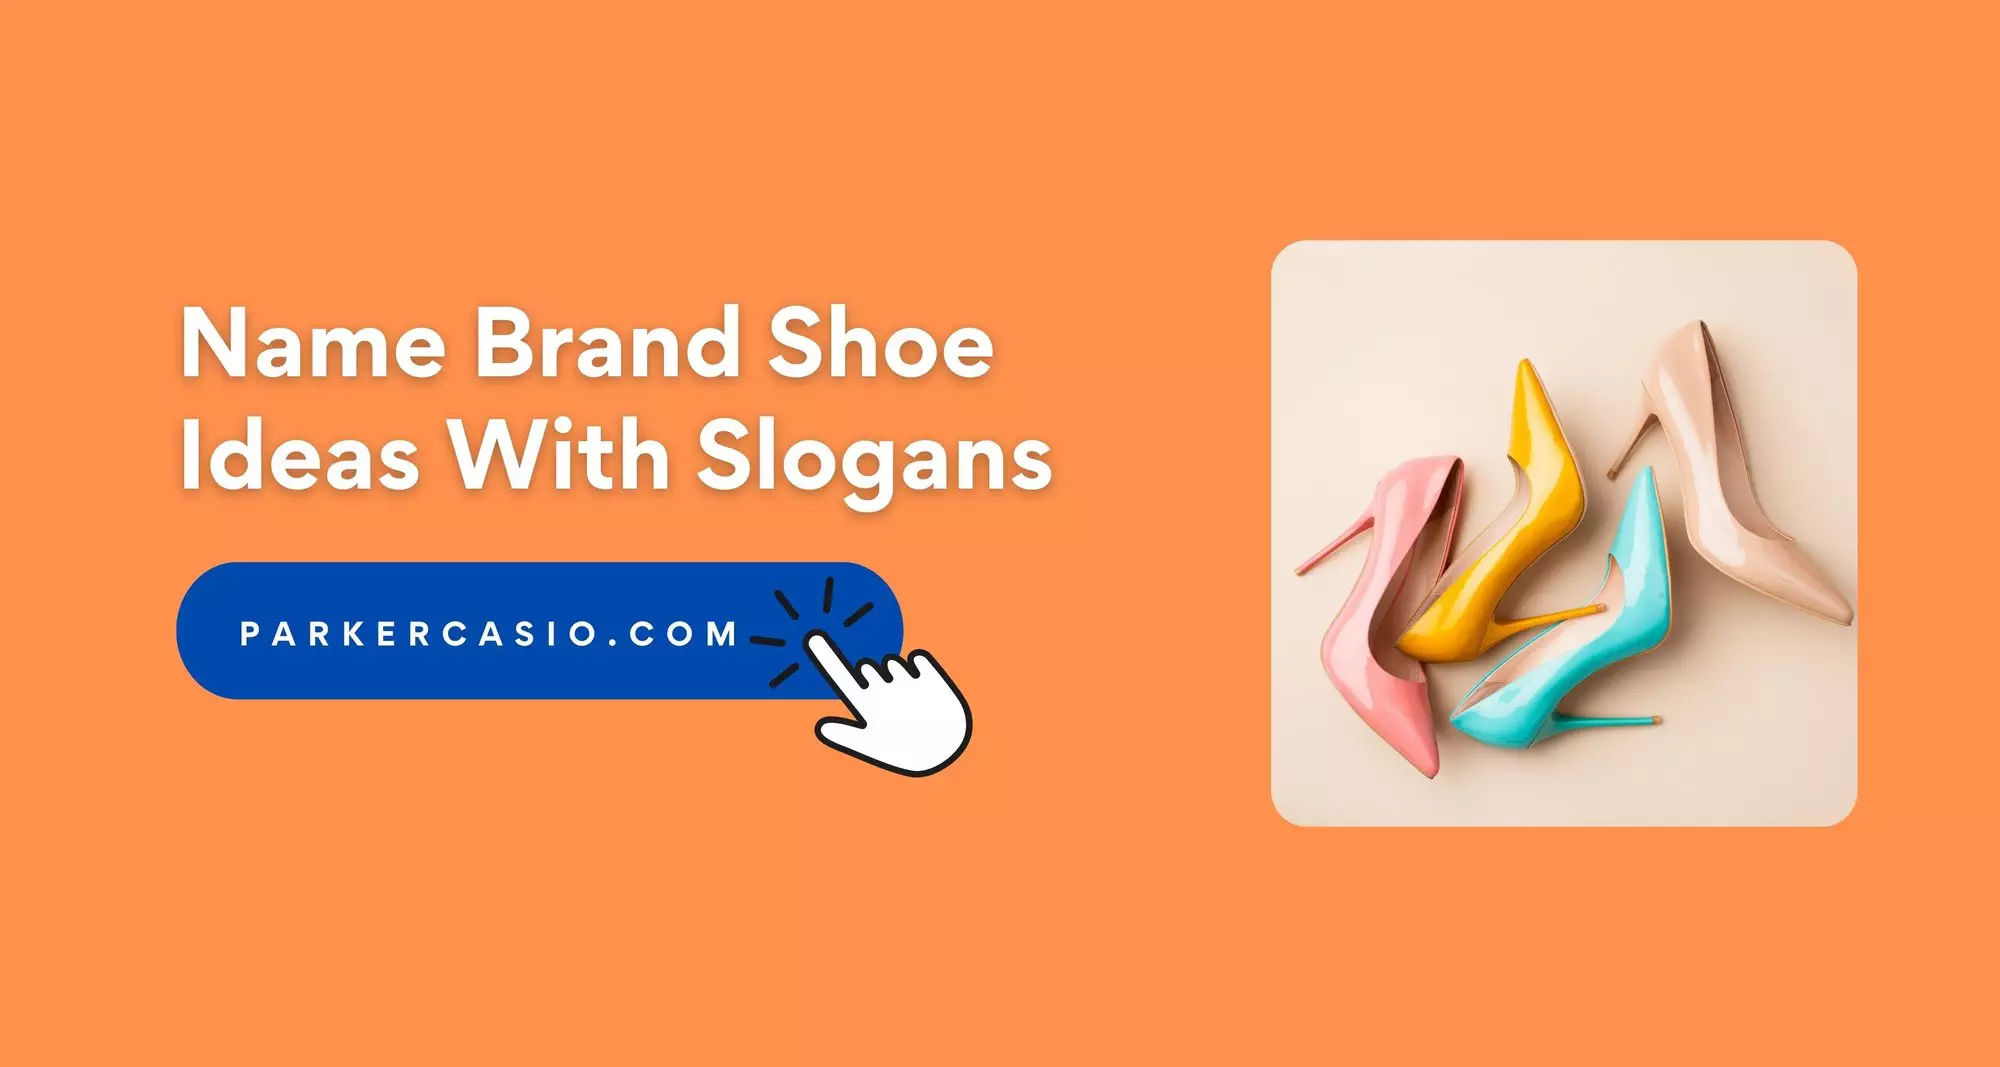 Name Brand Shoe Ideas: Choose The Best For Your Business [Slogans]